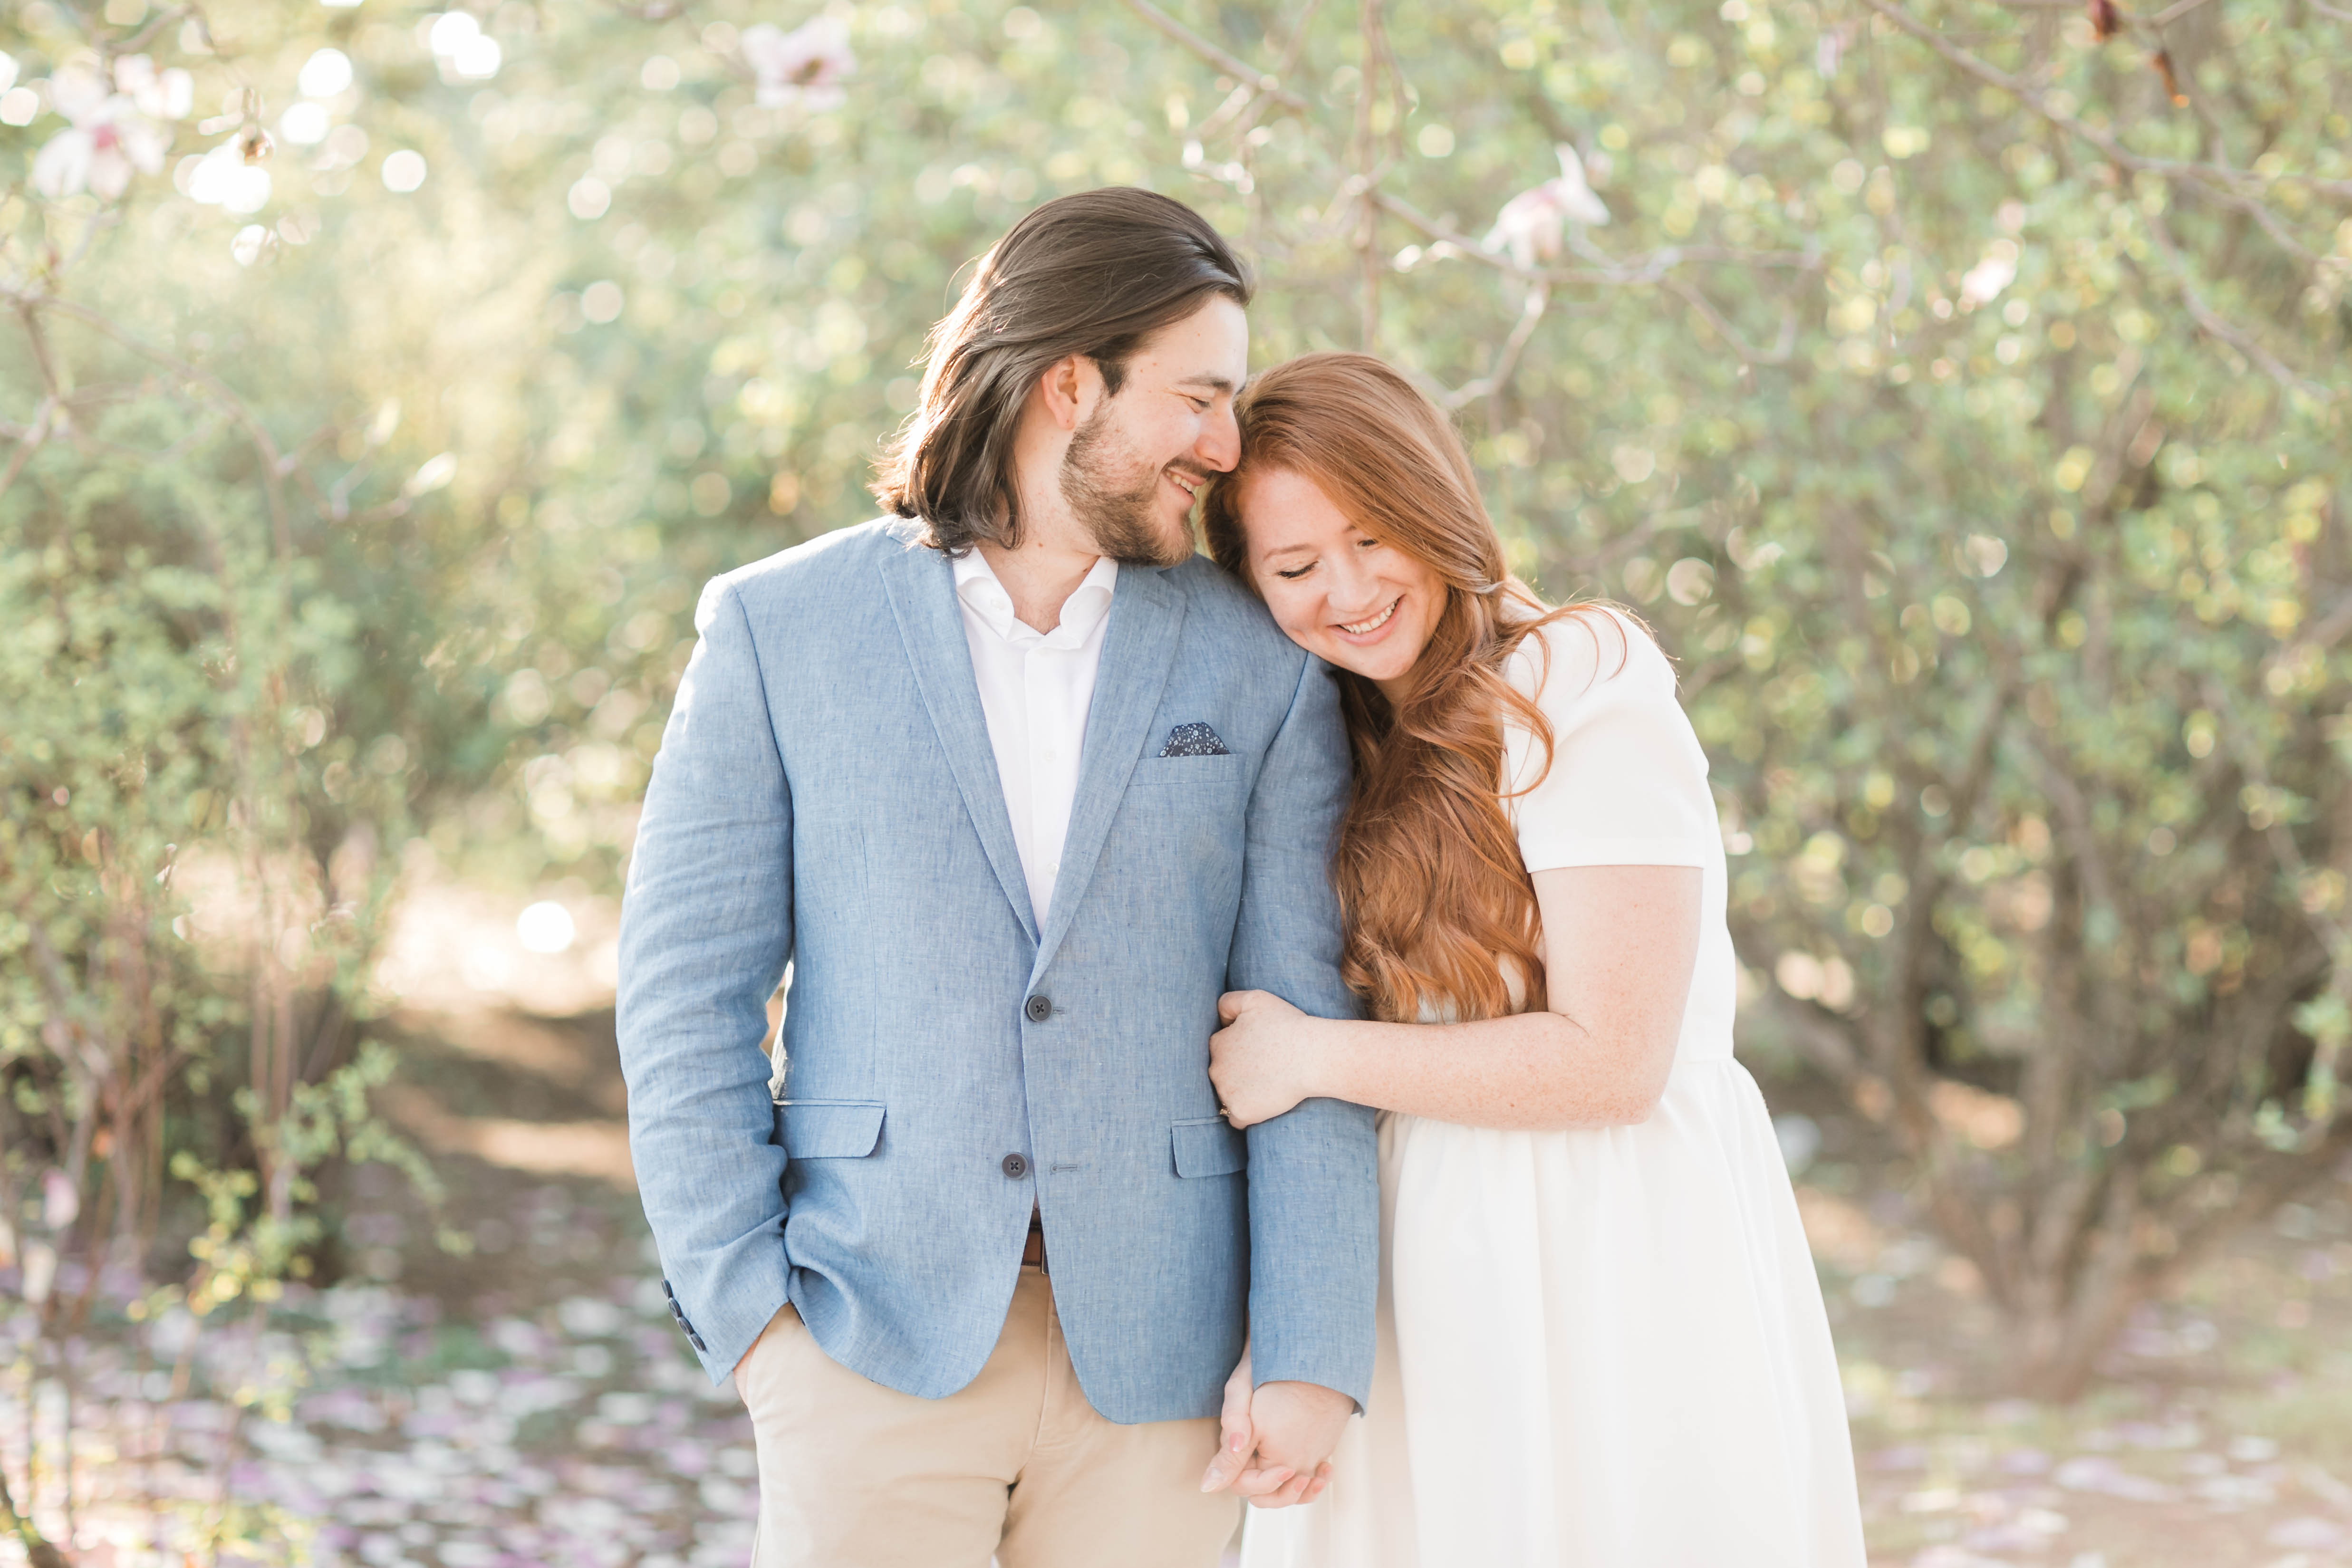 Today, I don’t have a big wedding update for you, but I do want to get real about wedding planning. Because, as of yesterday, we're only 10 months out...